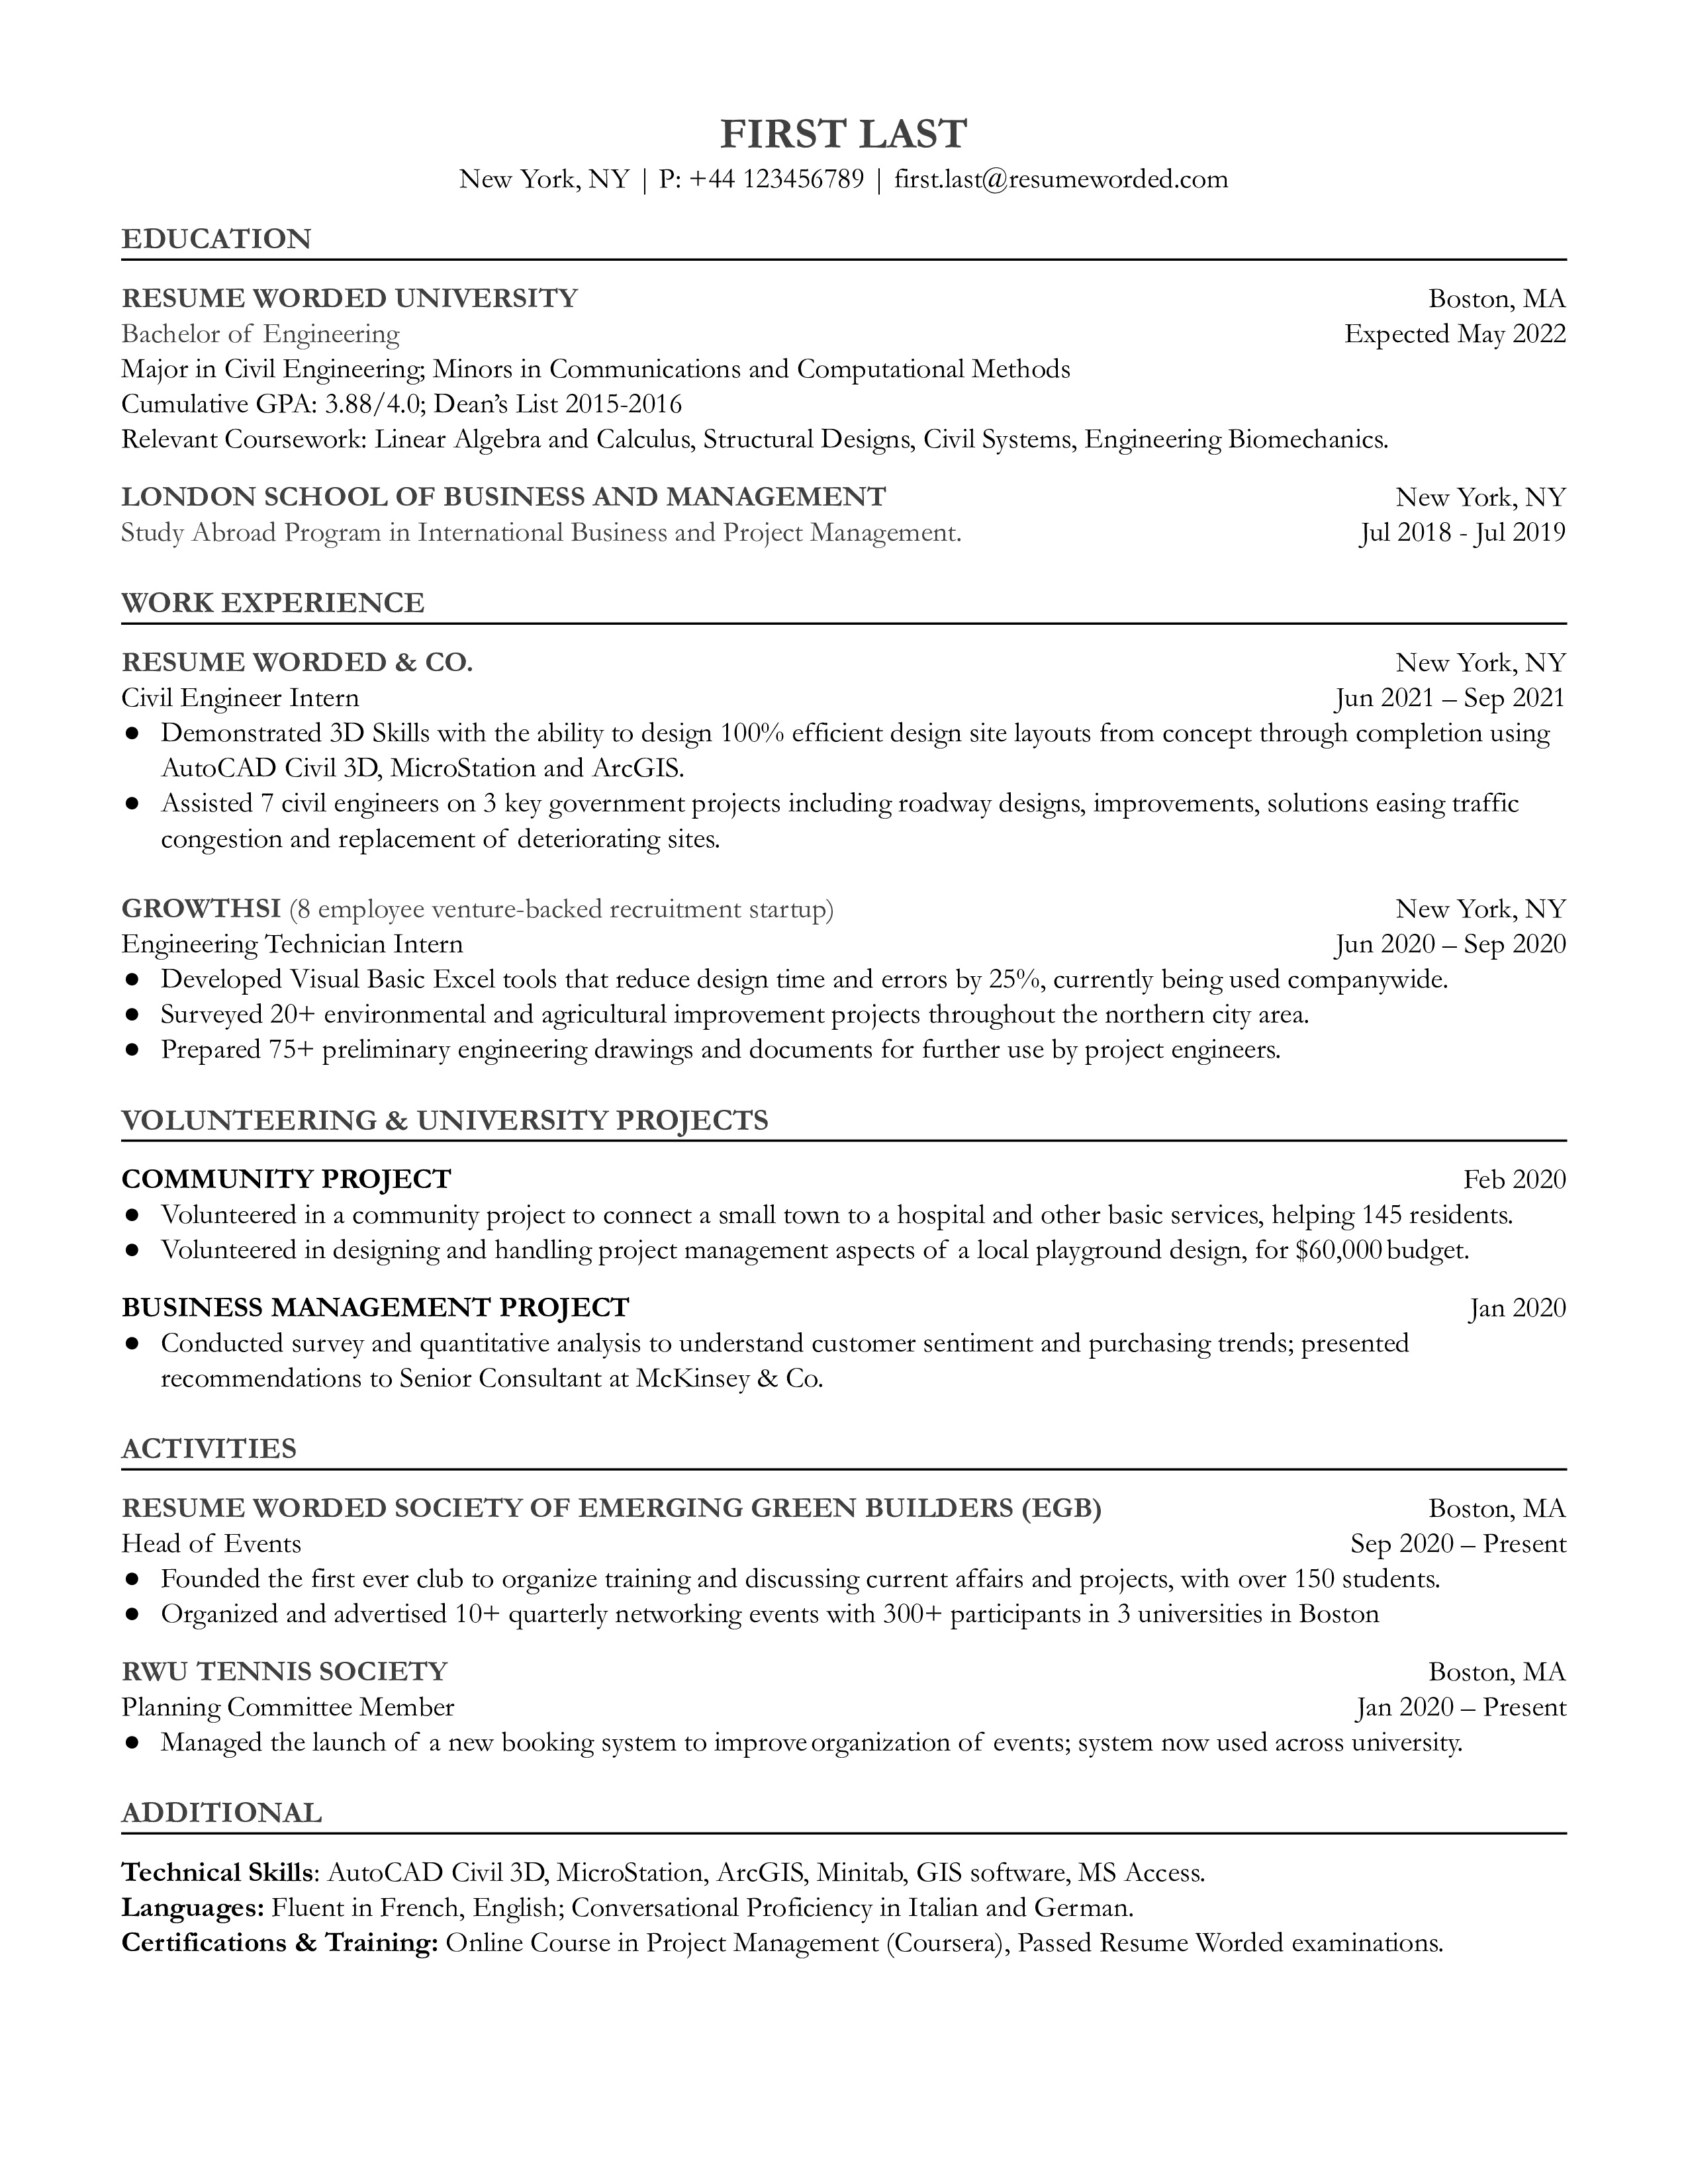 Entry level civil engineer resume sample template listing volunteer experience and university projects